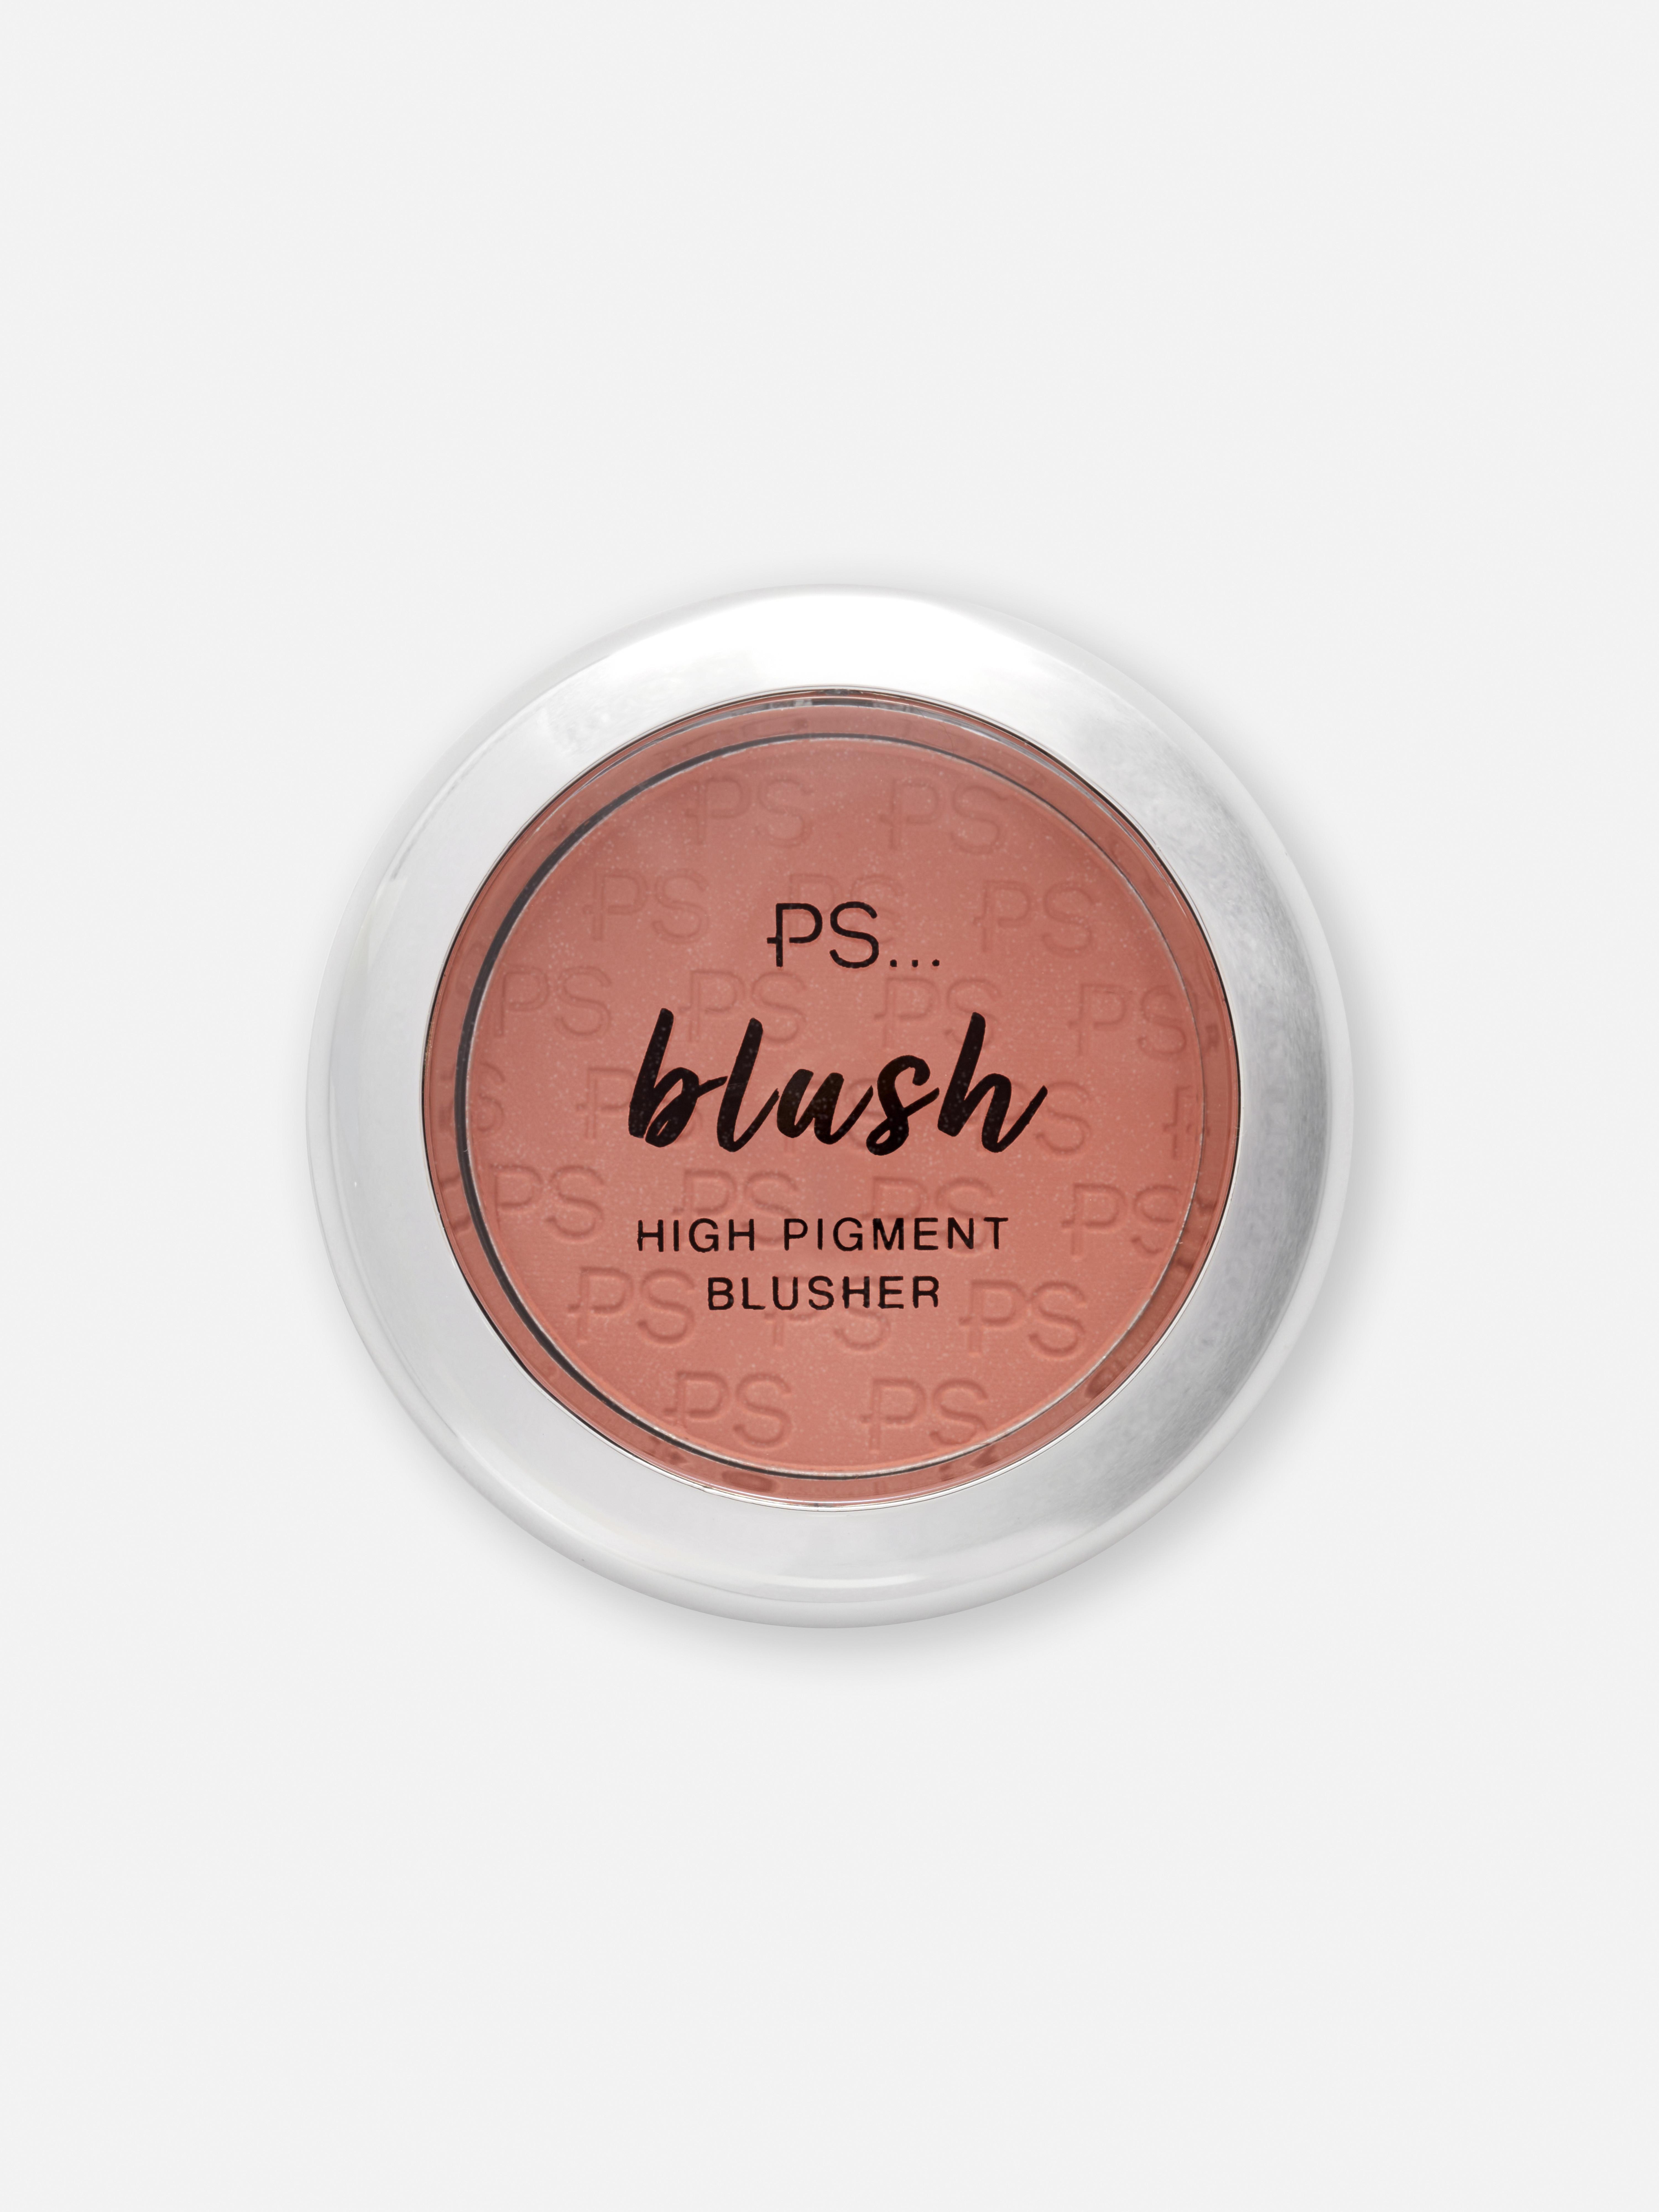 PS... High Pigment Blusher